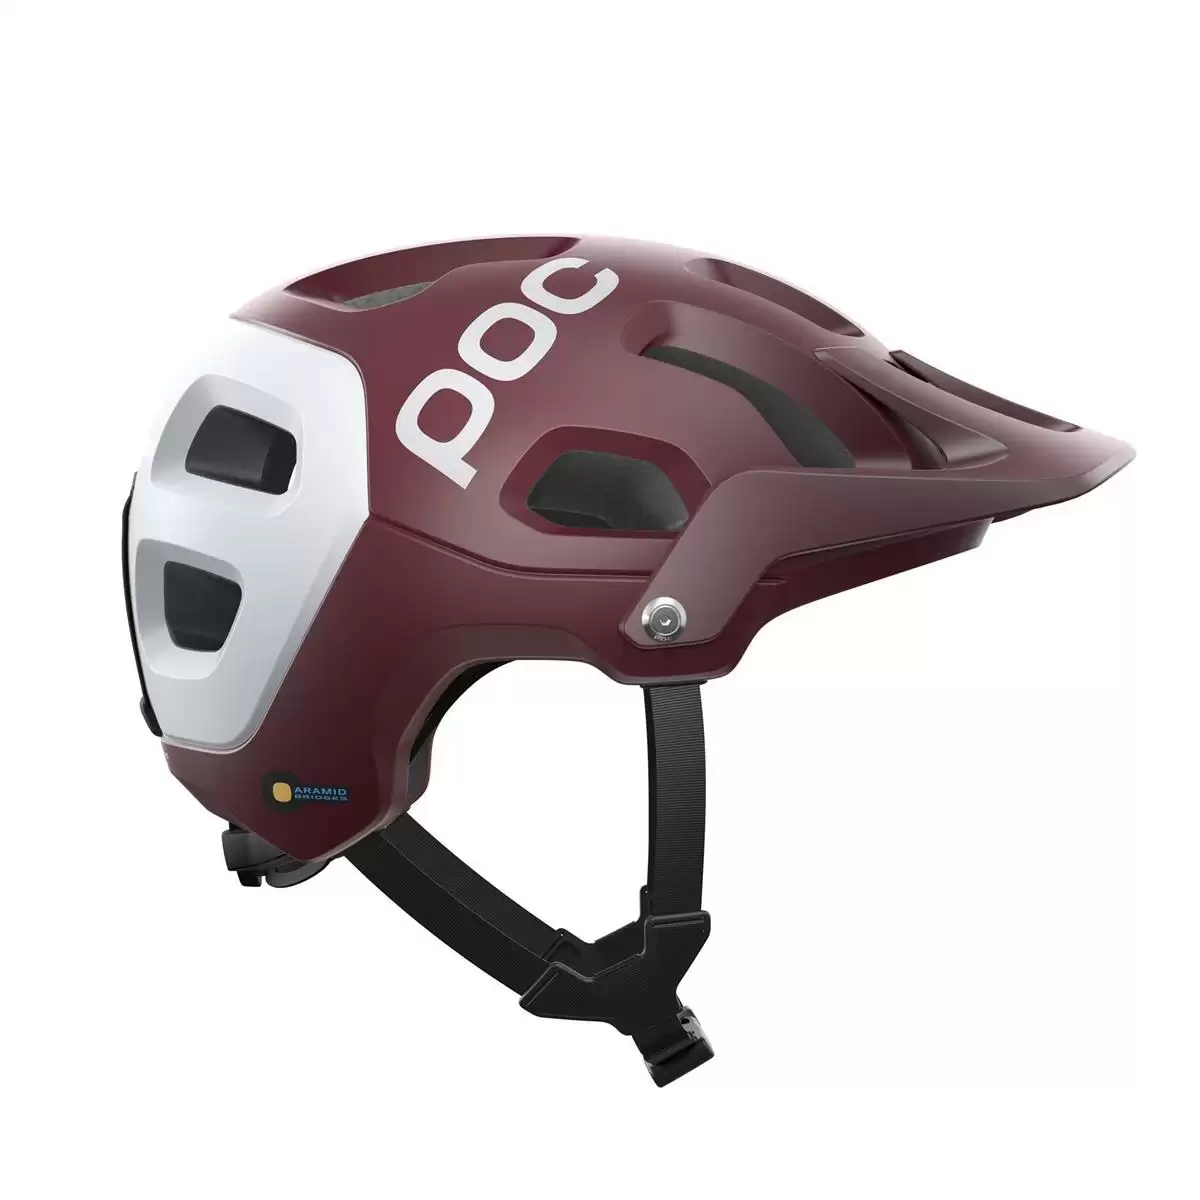 Enduro Helmet Tectal Race Spin Red Size XS-S (51-54cm) #2